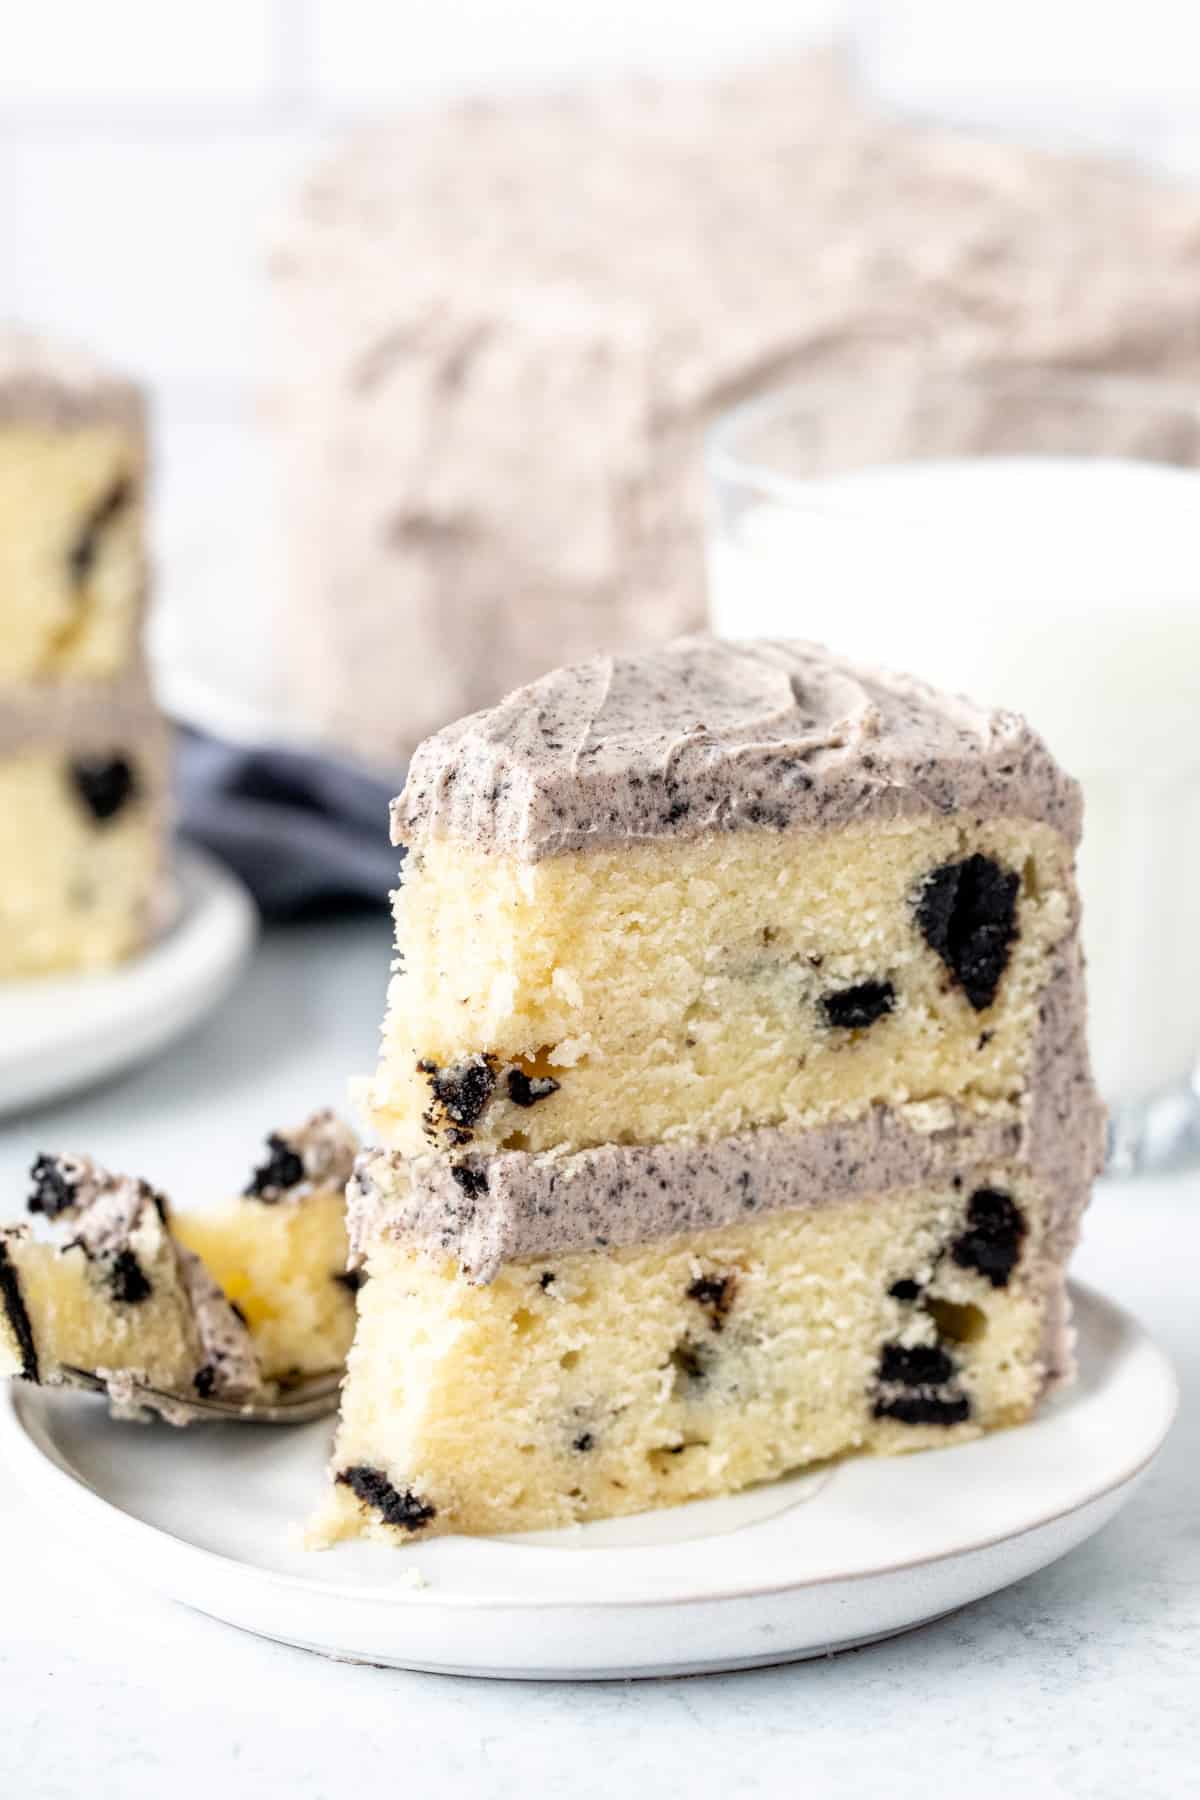 Slice of Oreo cake with a bite taken out of it, with a glass of milk